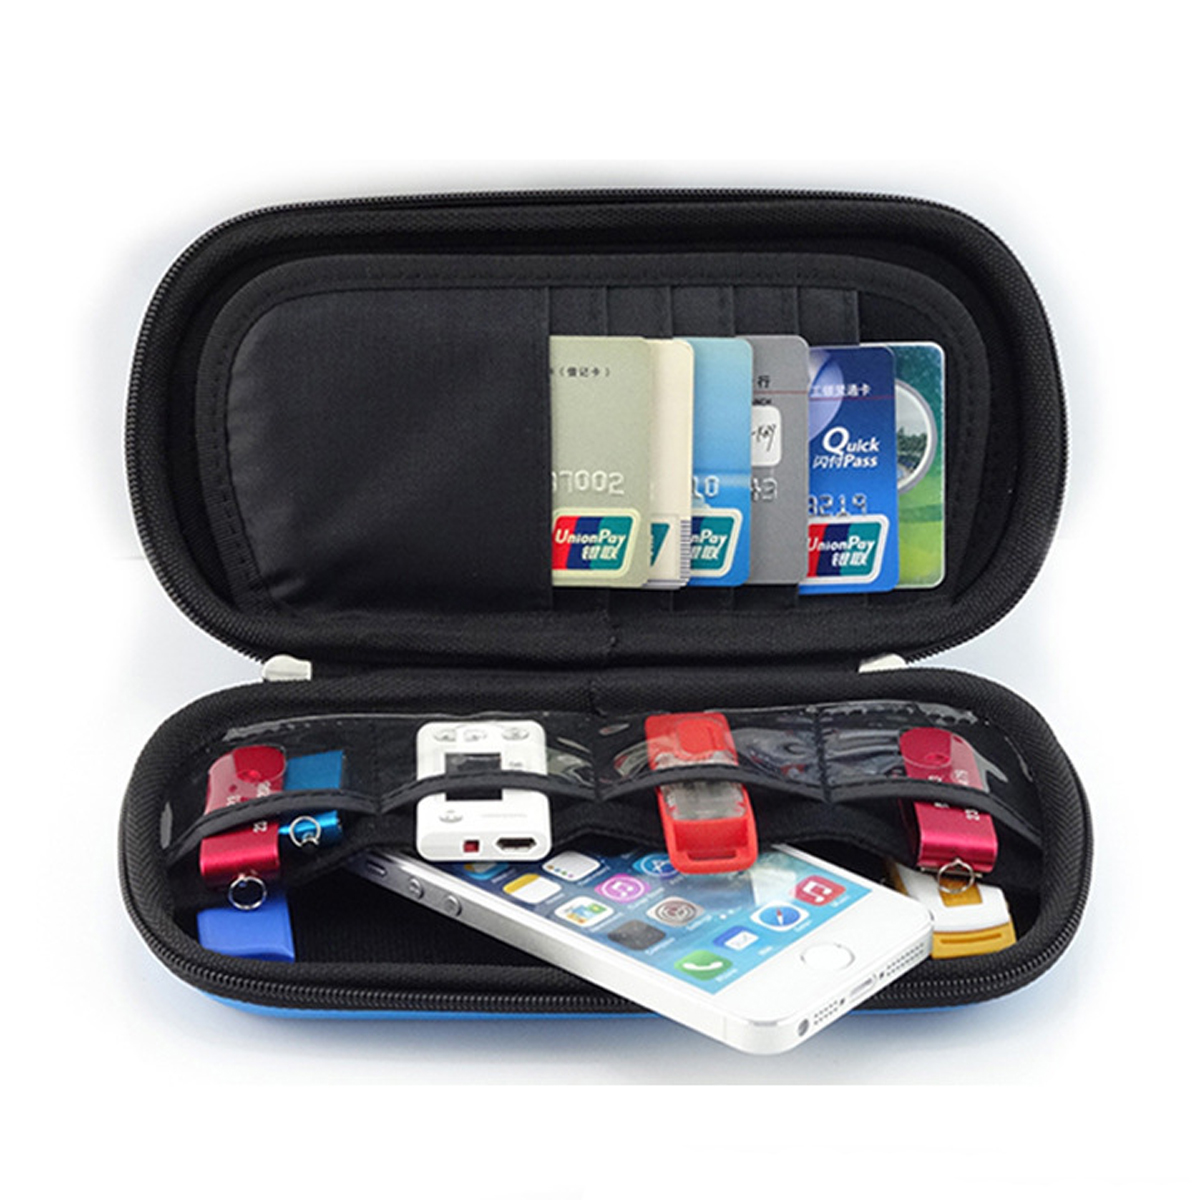 Multifunctional-EVA-Bag-For-TF-Data-Cable-USB-Flash-Drive-Hard-Disk-Cell-Phone-Holder-Waterproof-Dig-1890378-4